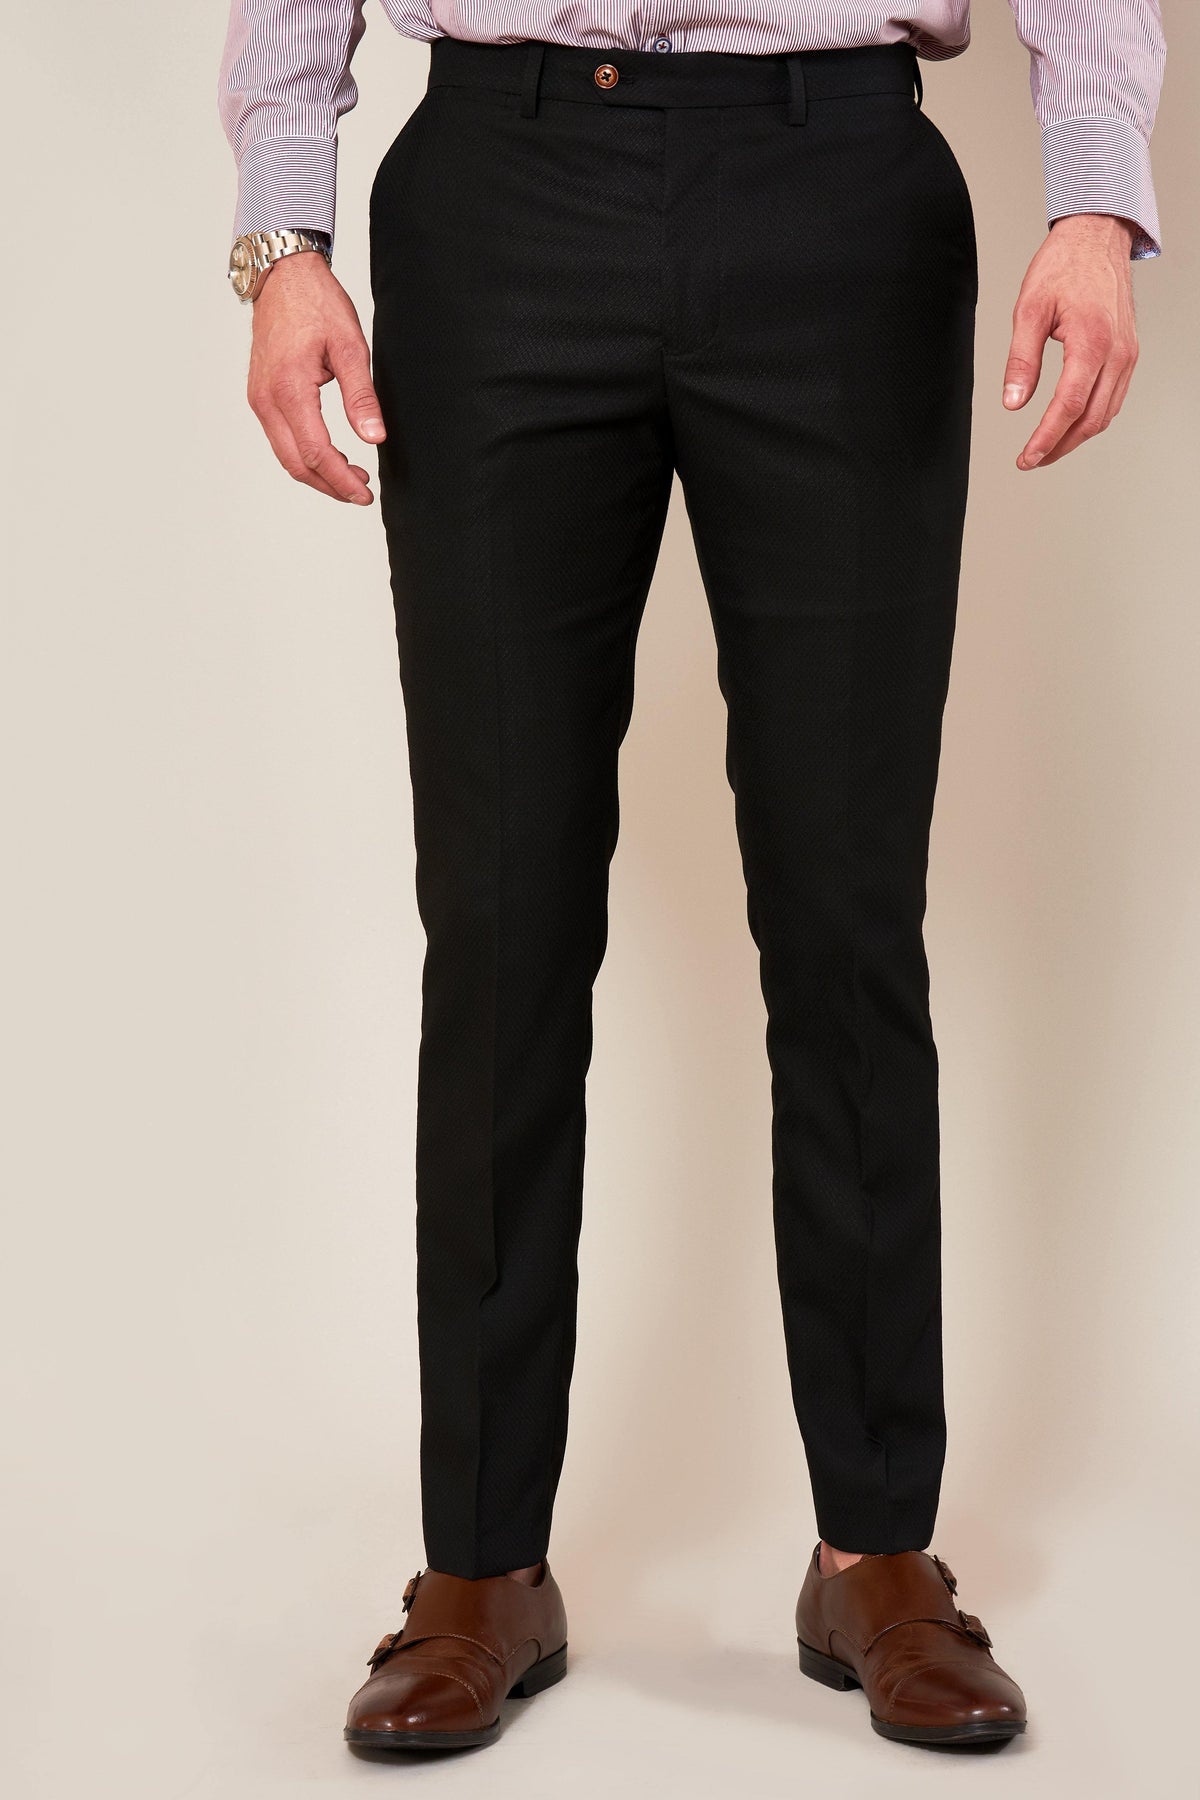 Givenchy Skinny Fit Denim Trousers With Zip in Black | FWRD